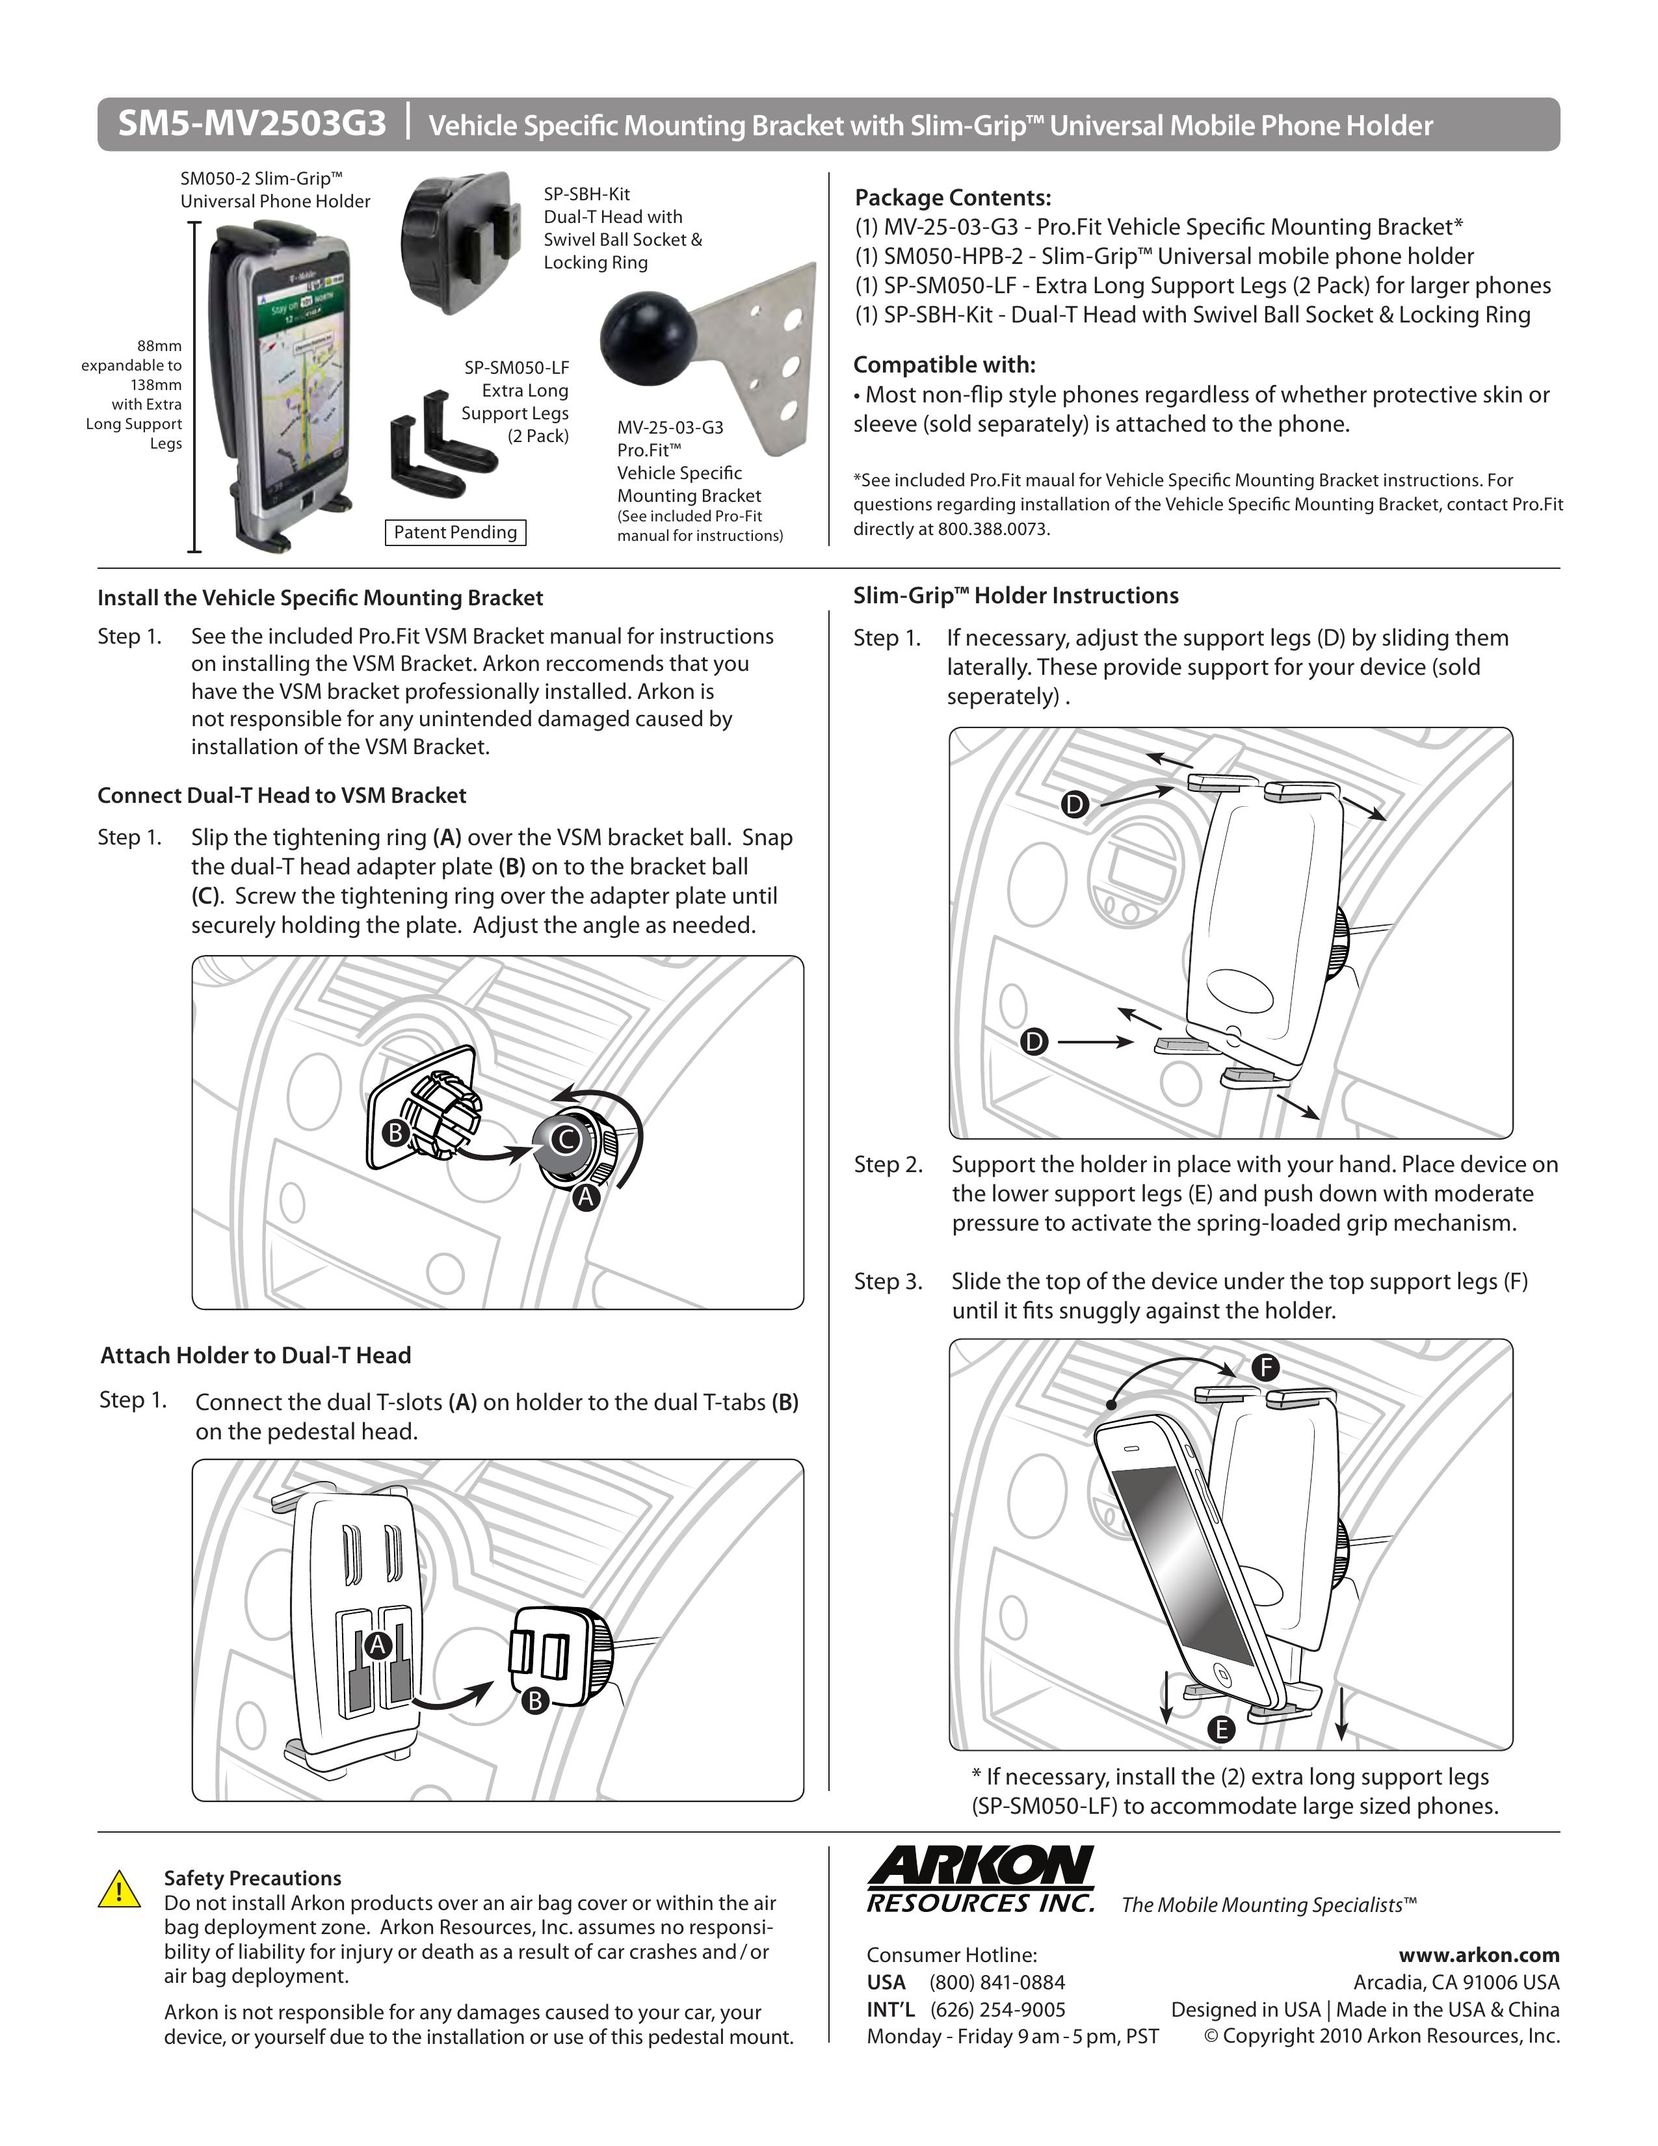 Avocent SM5-MV2503G3 Cell Phone Accessories User Manual